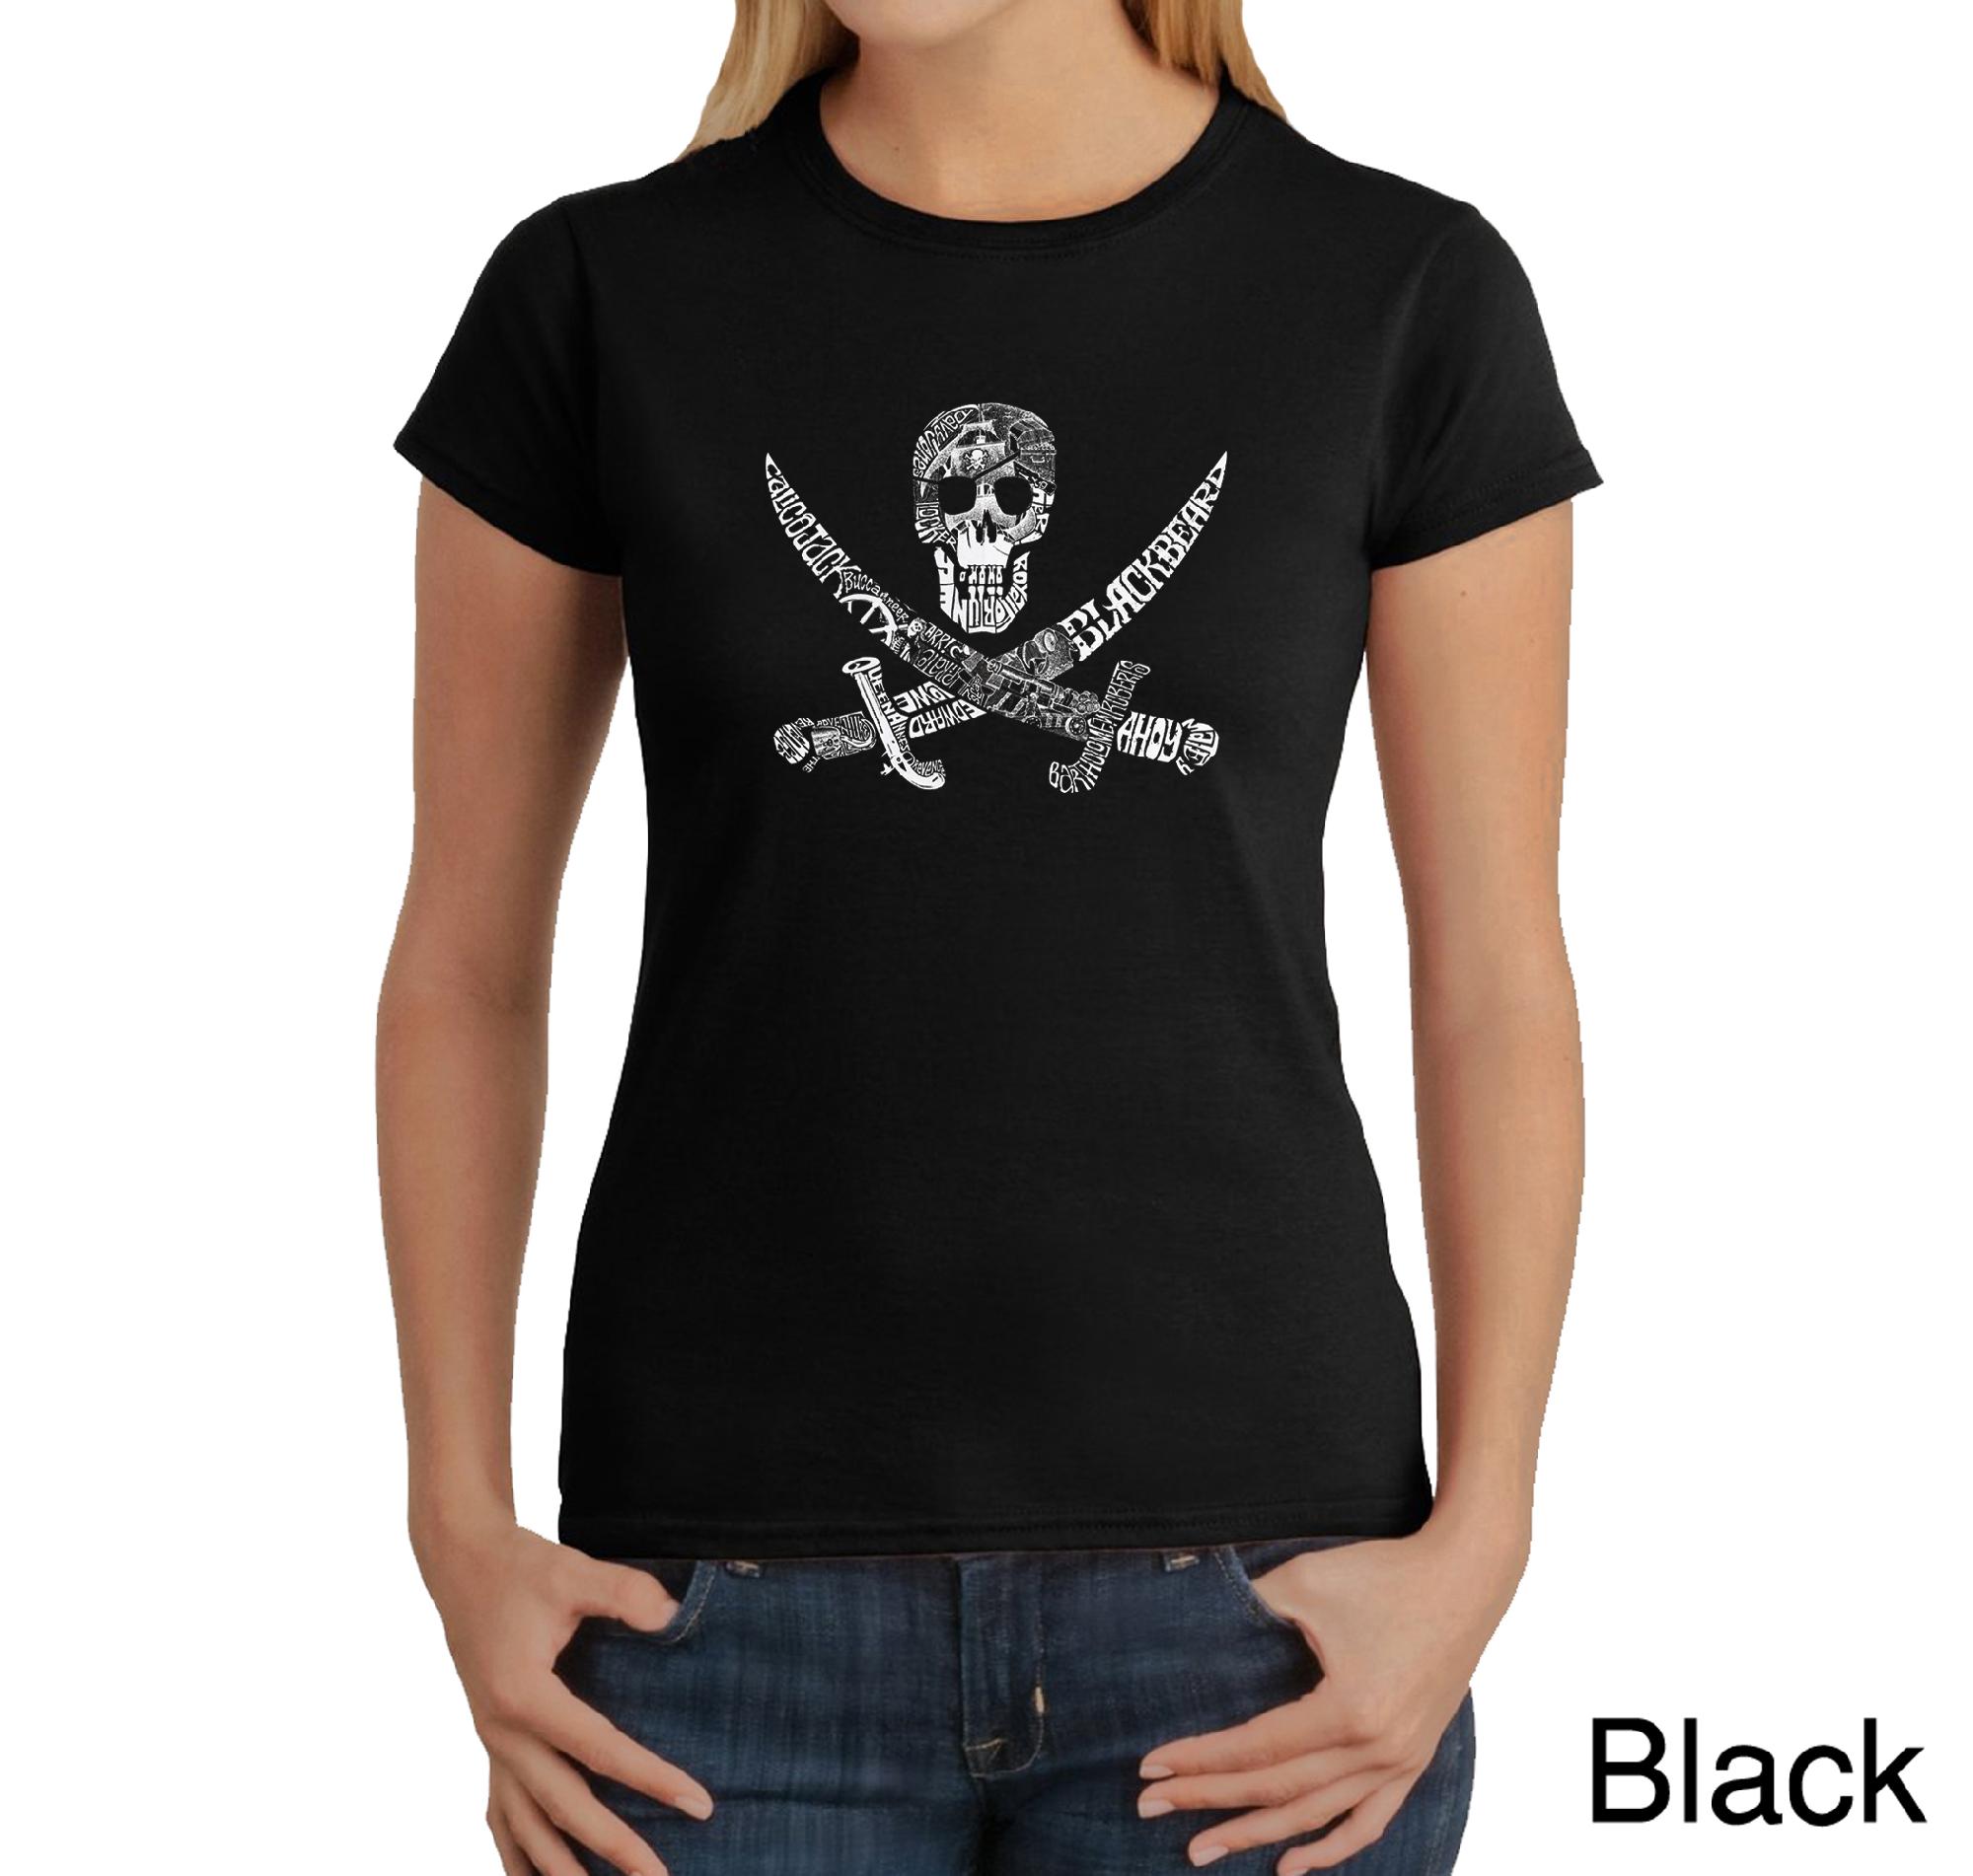 Los Angeles Pop Art Women's Word Art T-shirt - Pirate Captains, Ships and Imagery - Online Exclusive